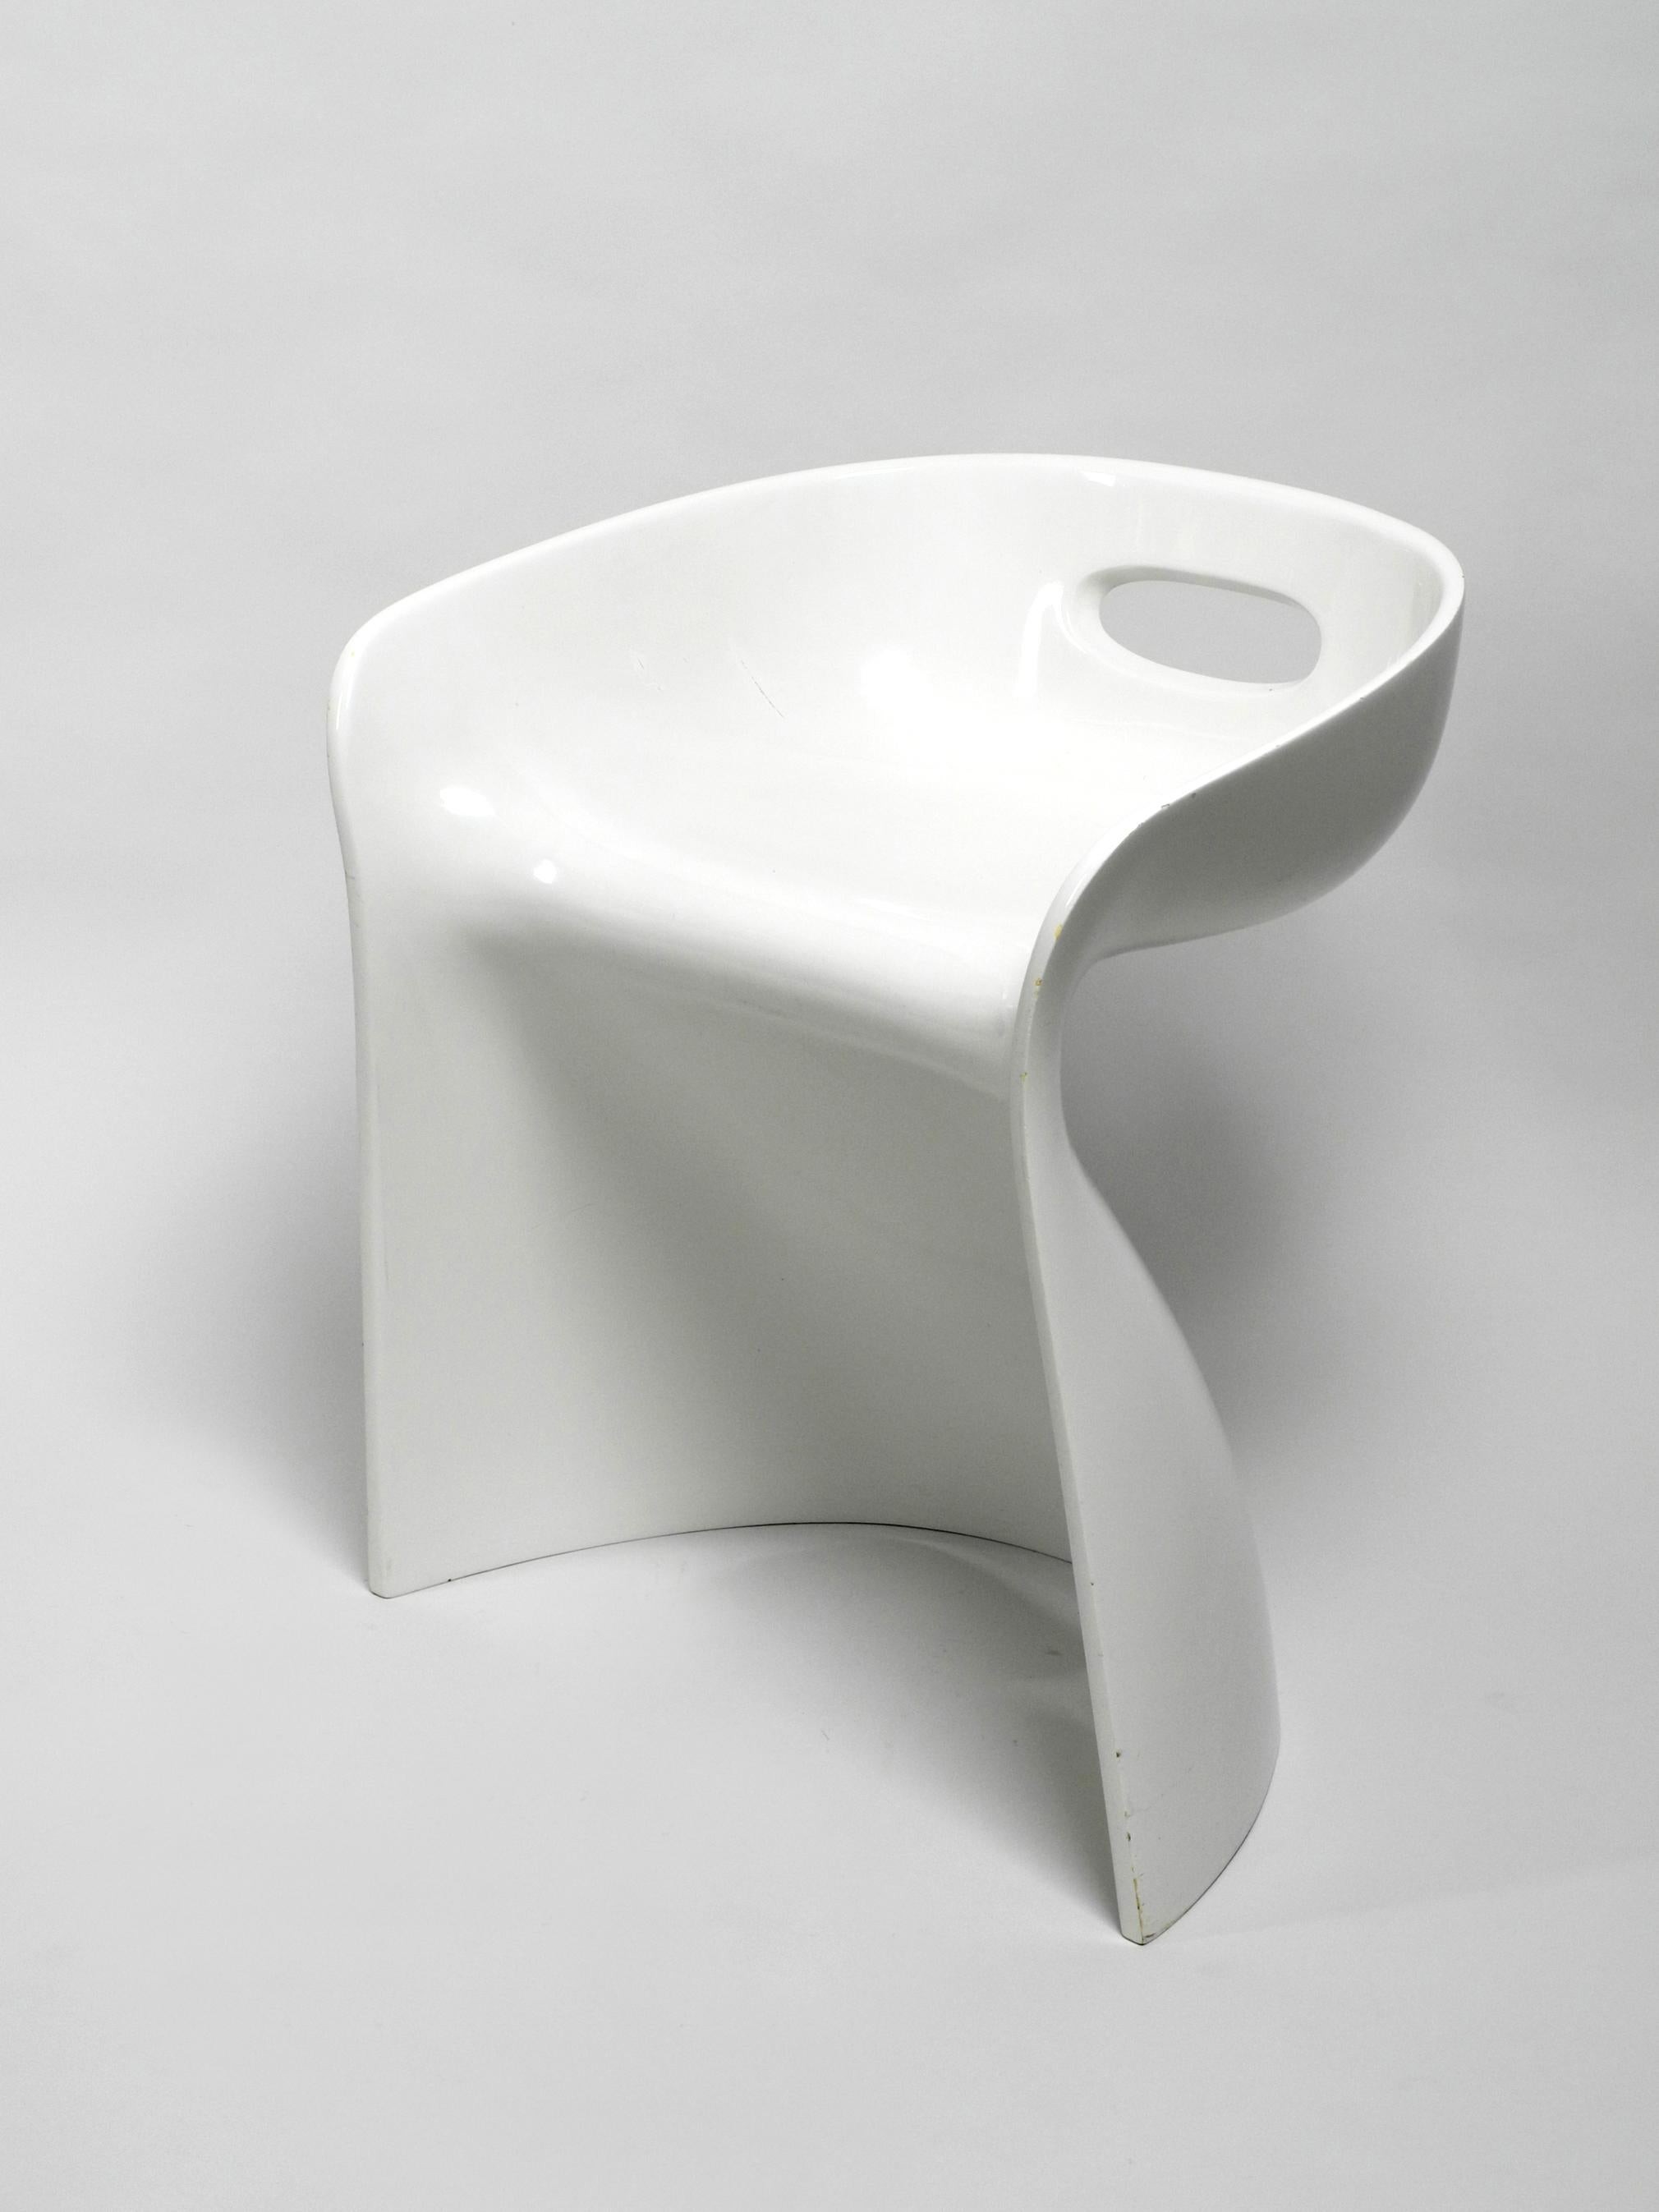 Space Age Rare White Stool by Winfried Staeb from the 1970s for Form + Life Collection